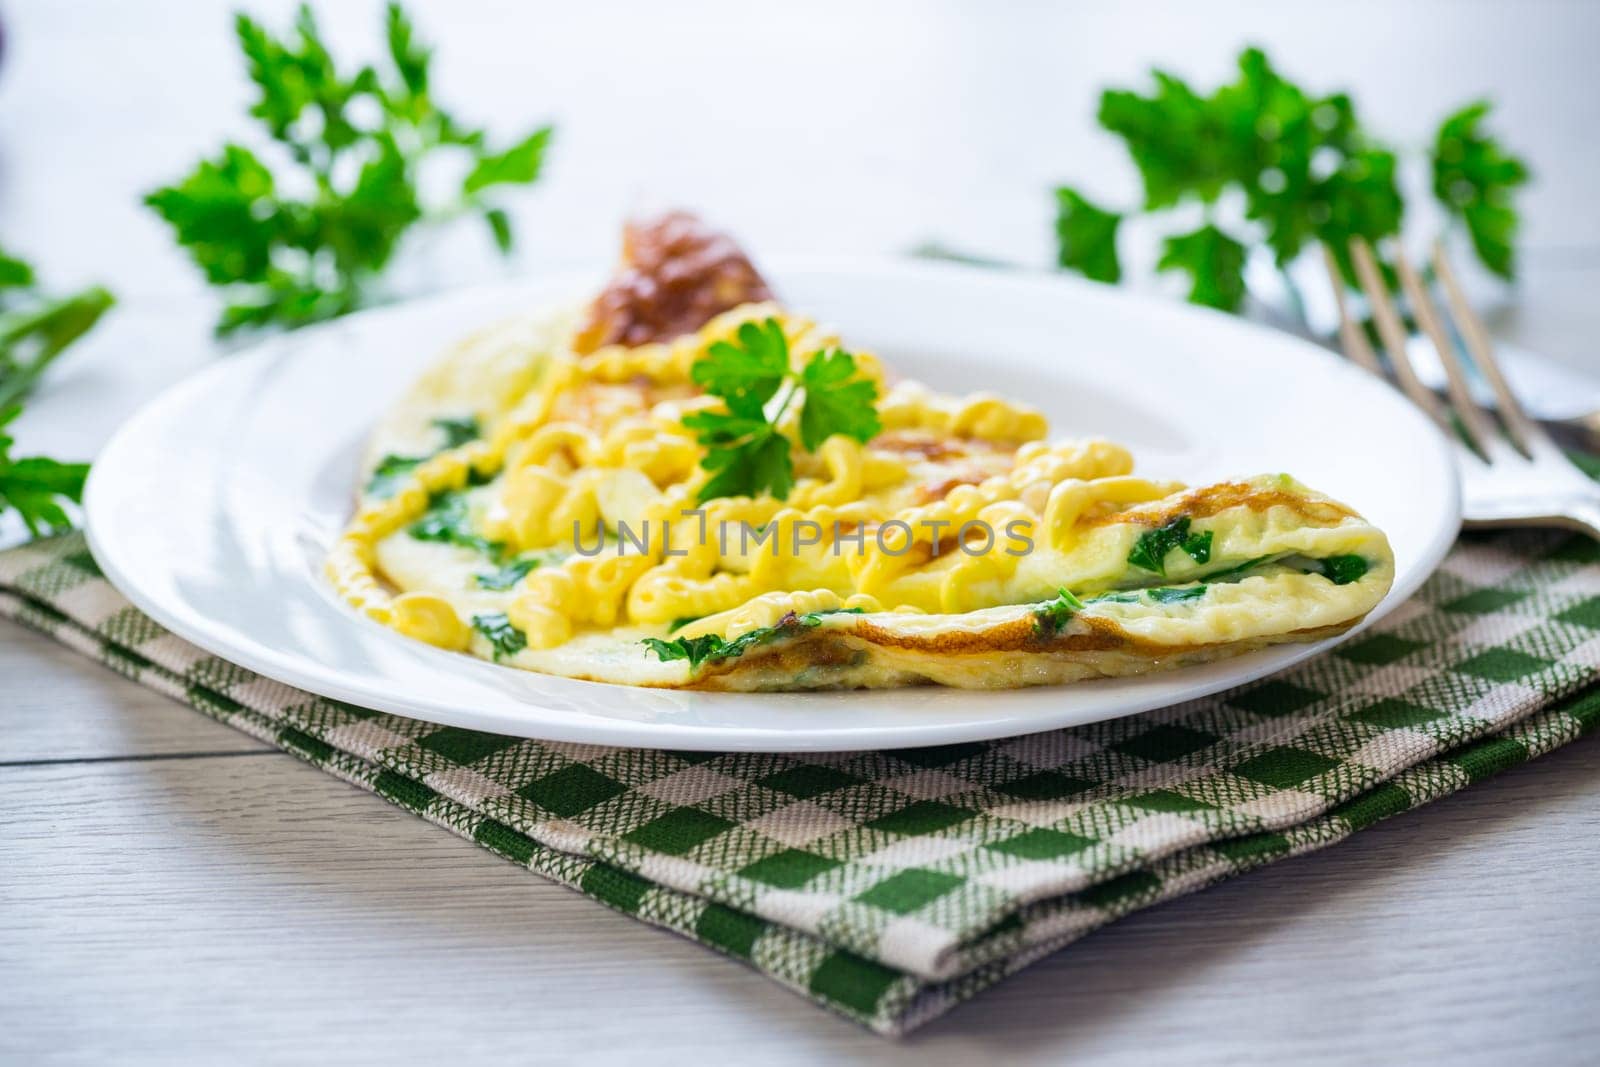 fried omelette stuffed with herbs, parsley, dill by Rawlik